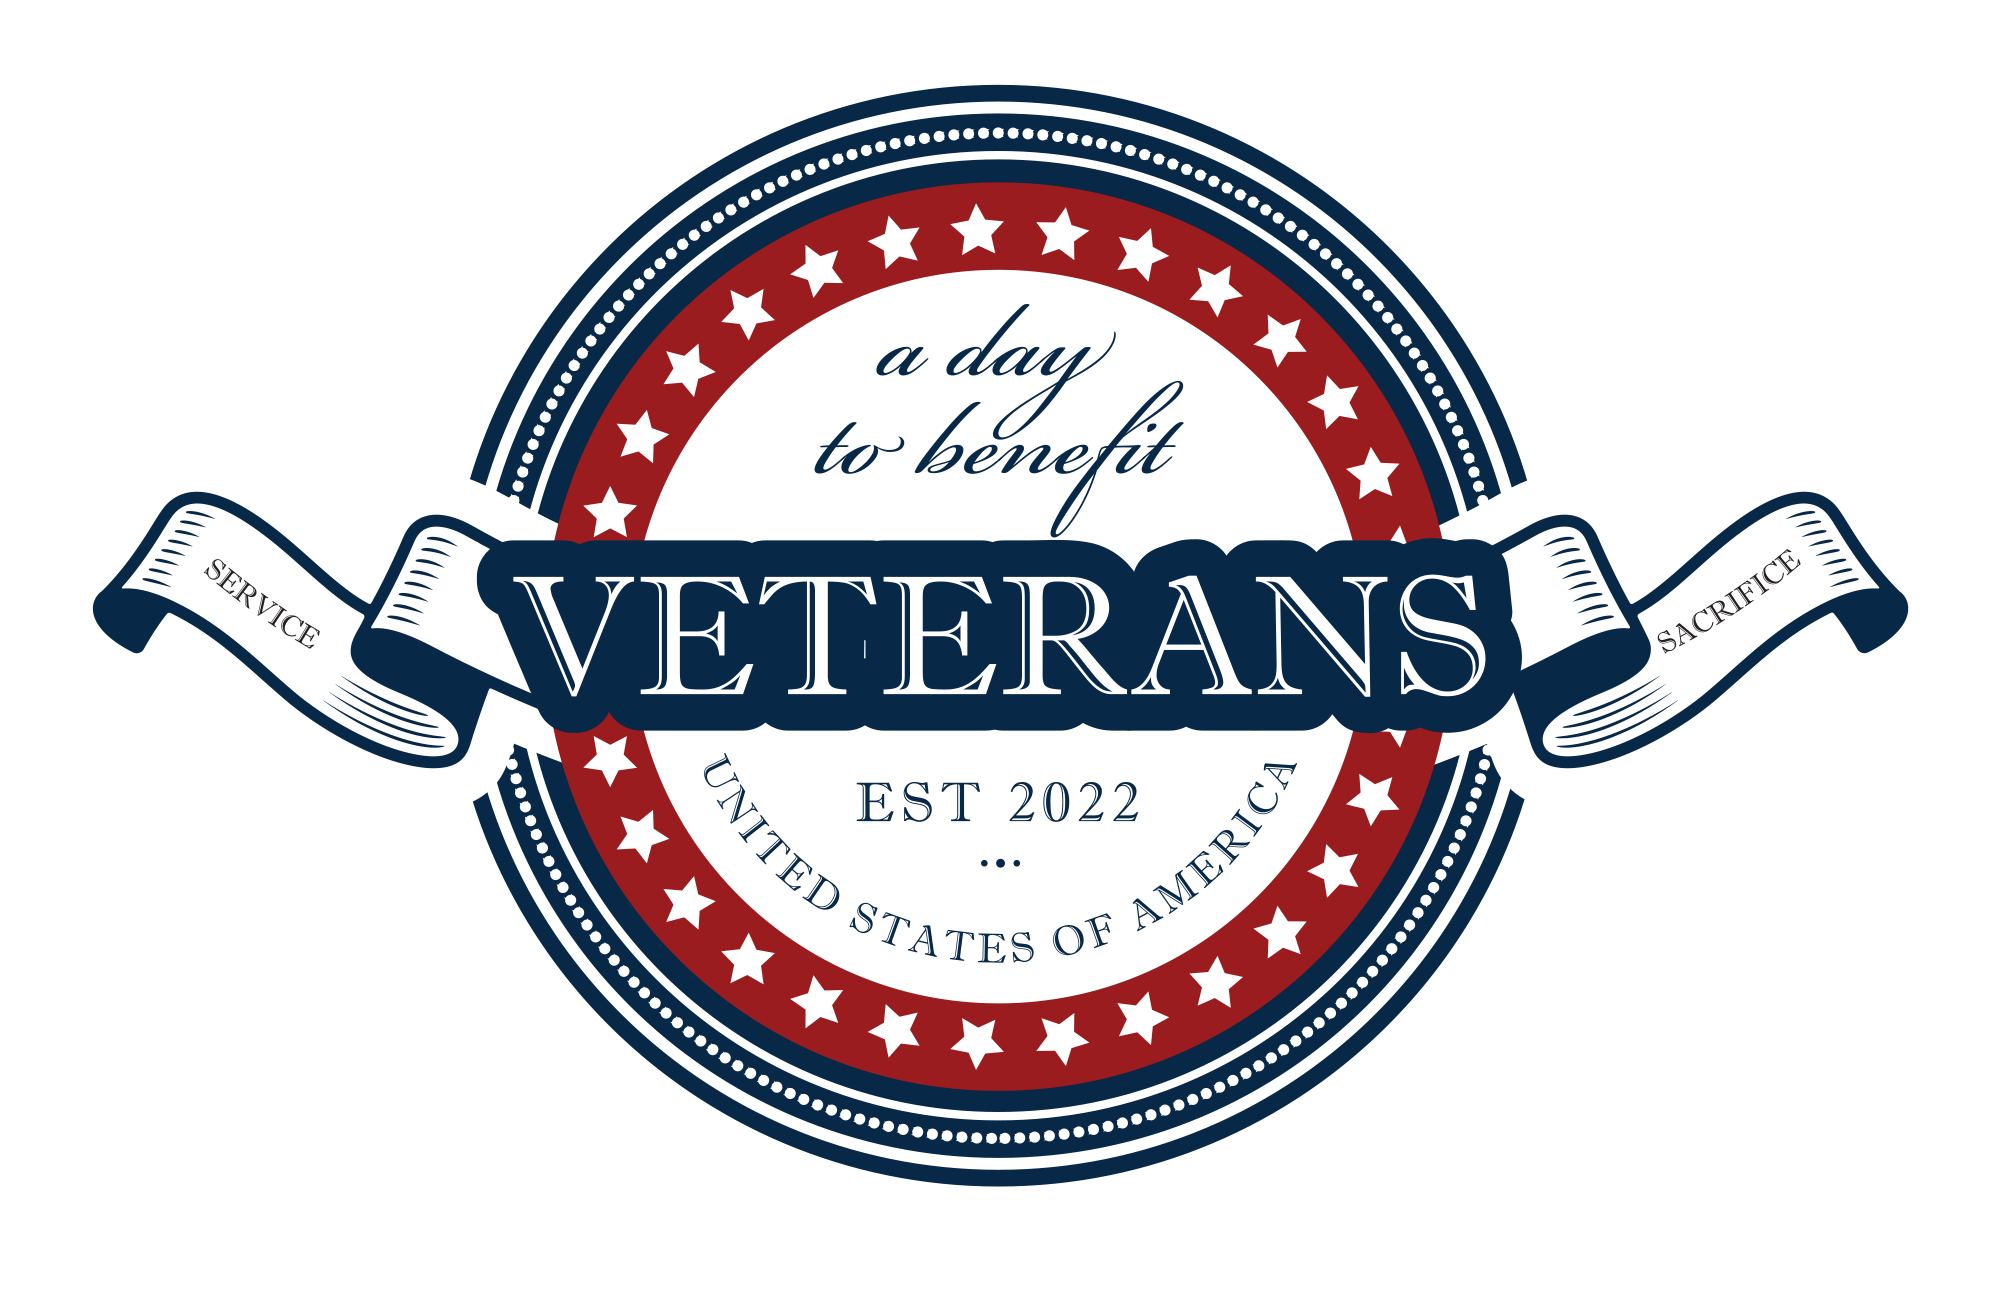 A Day to Benefit Veterans